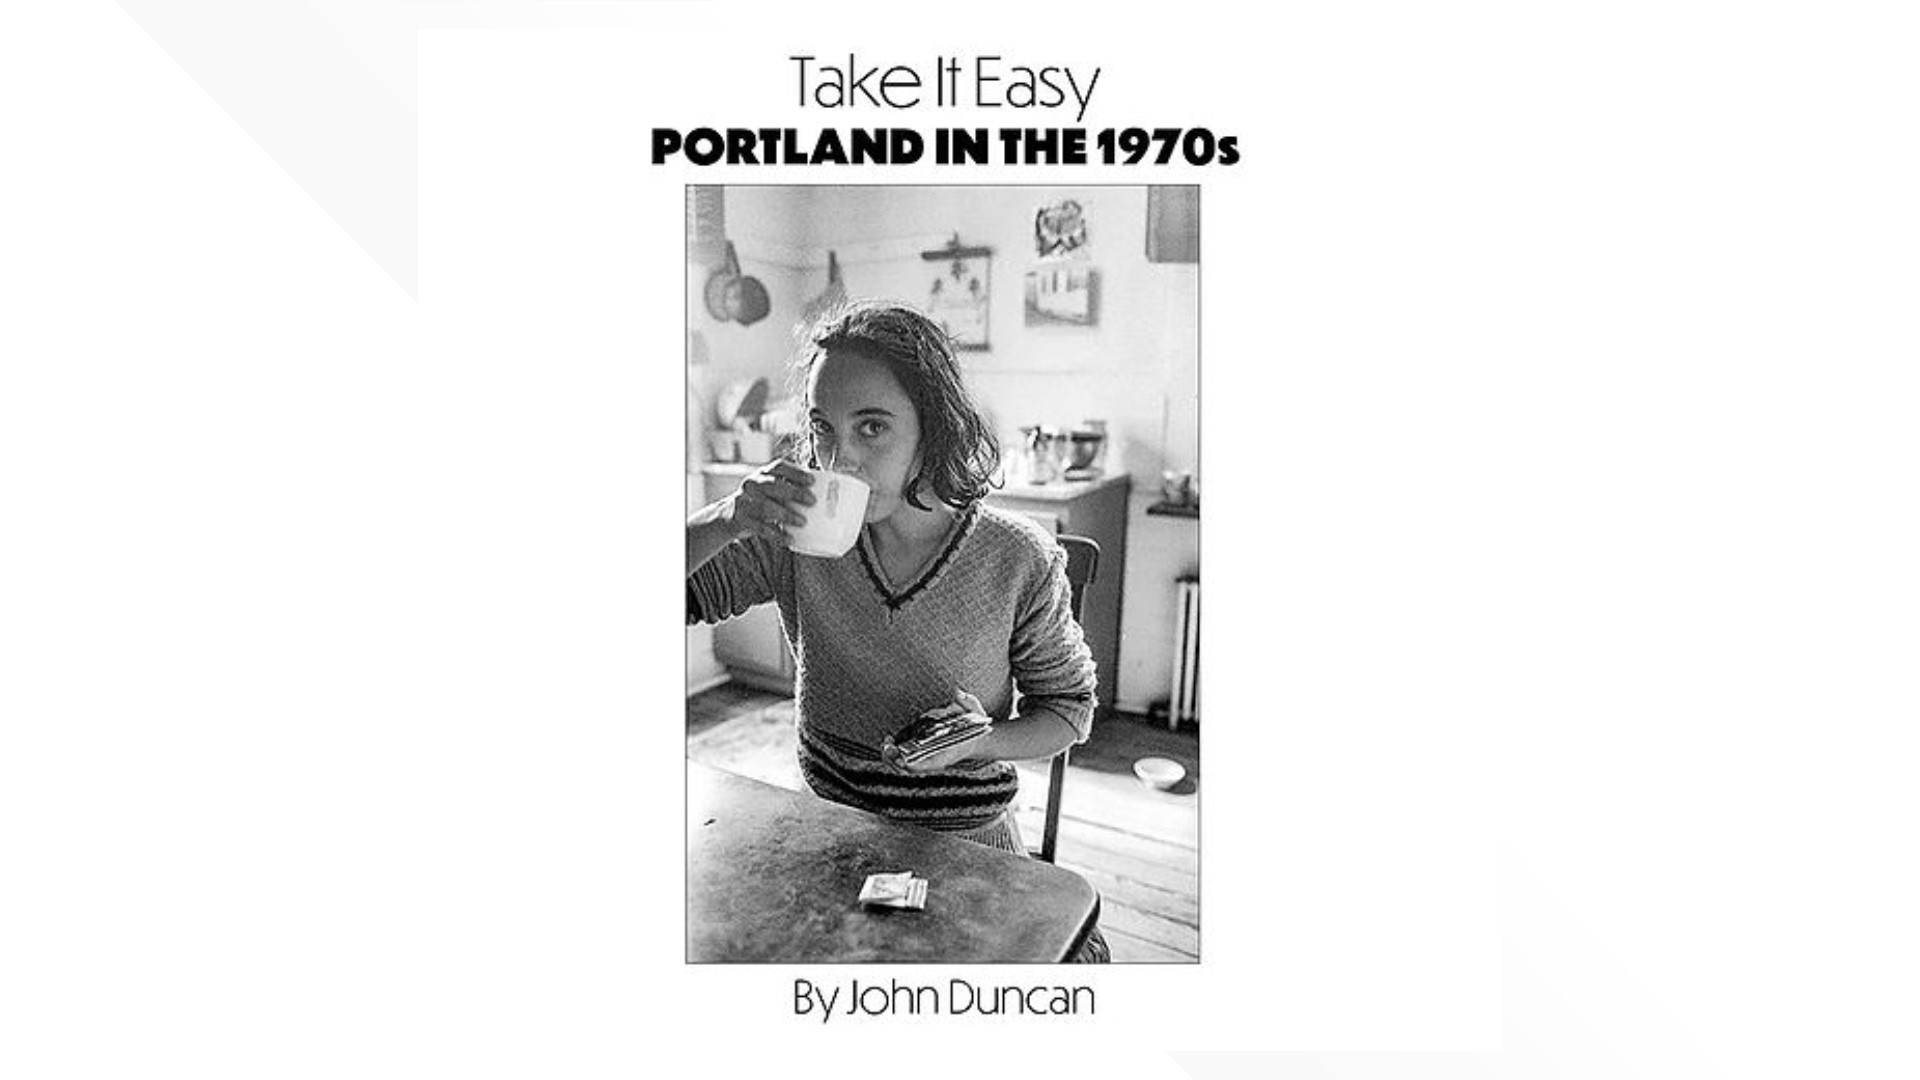 Photographer John Duncan's new book 'Take It Easy: Portland in the 1970s' shares old photographs of what endures and what’s disappeared in the Maine town